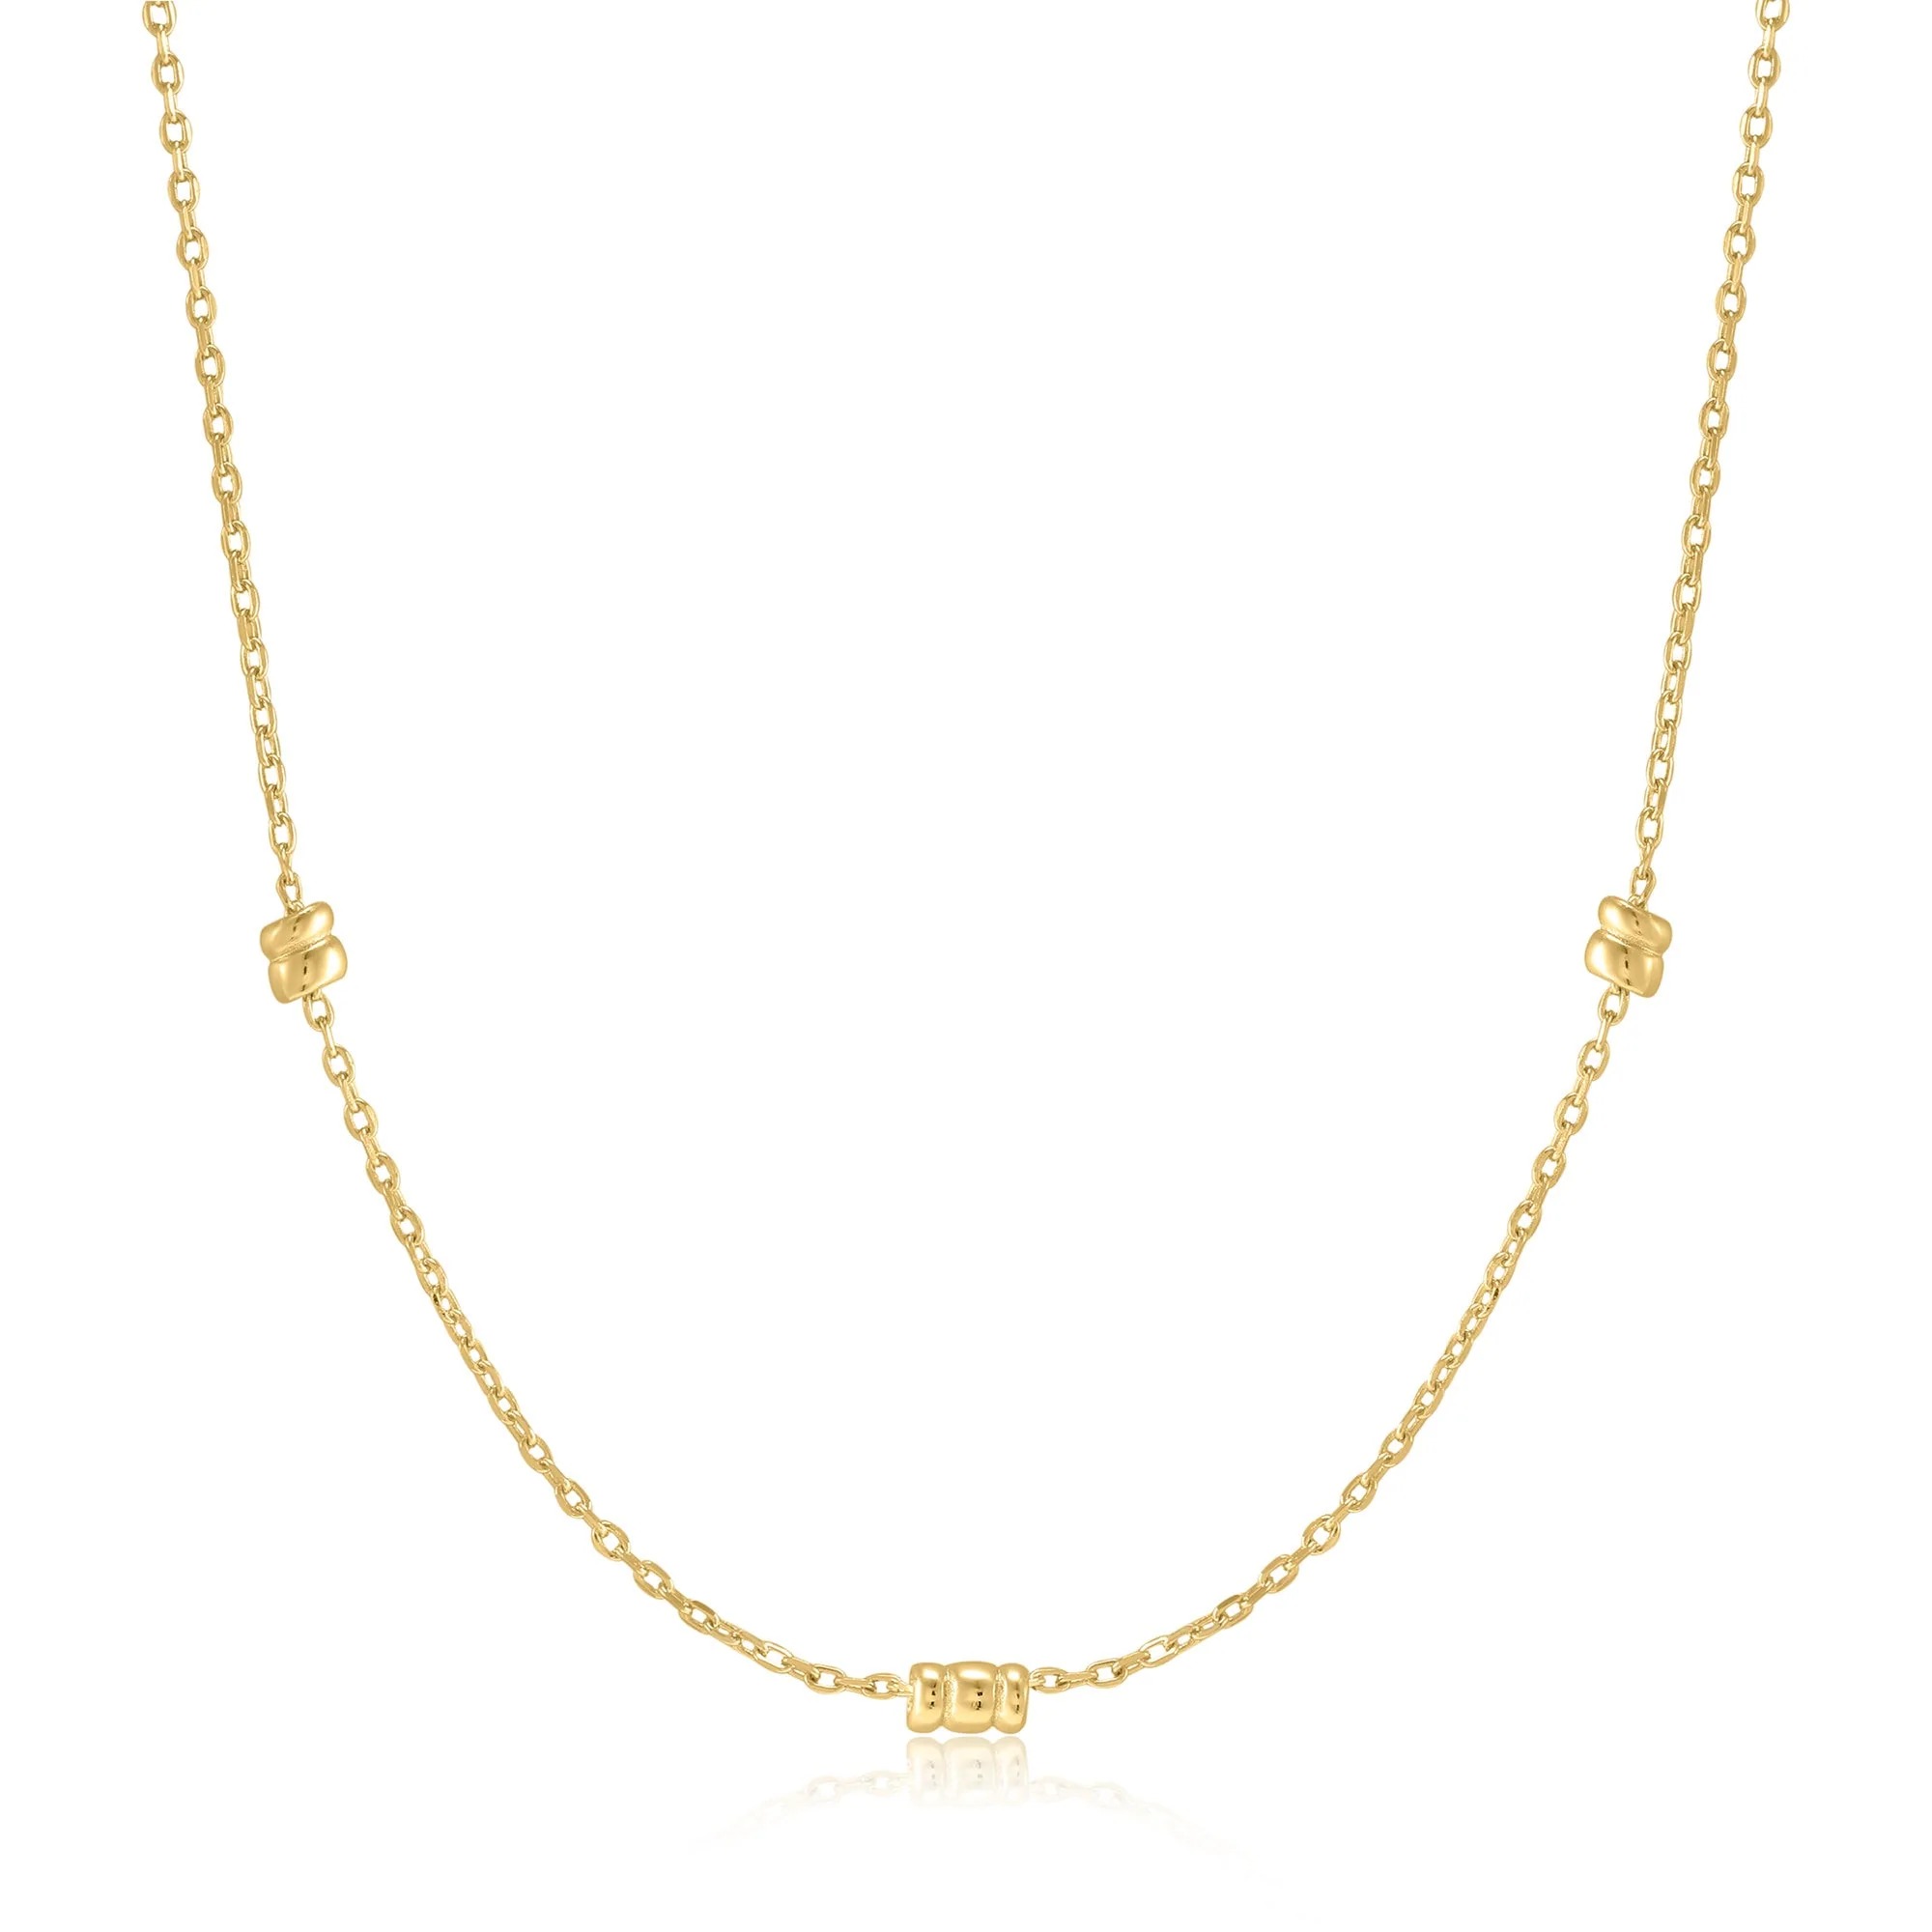 ANIA HAIE Gold Smooth Twist Chain Necklace